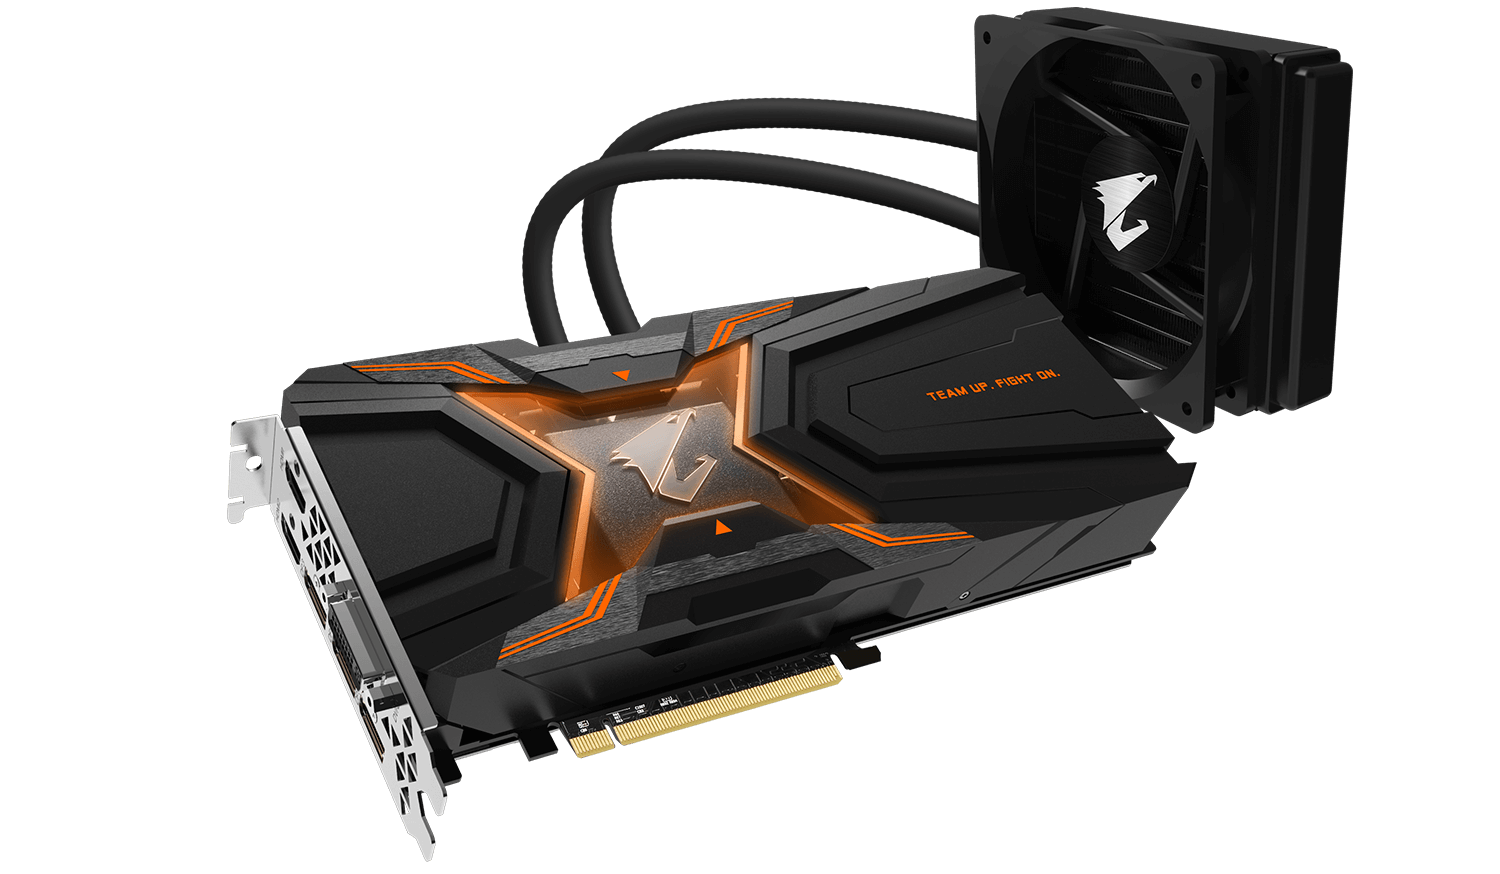 GeForce® GTX 1080 Ti Waterforce Xtreme 11G (rev. 1.0/1.1) Key Features | Graphics Card - GIGABYTE